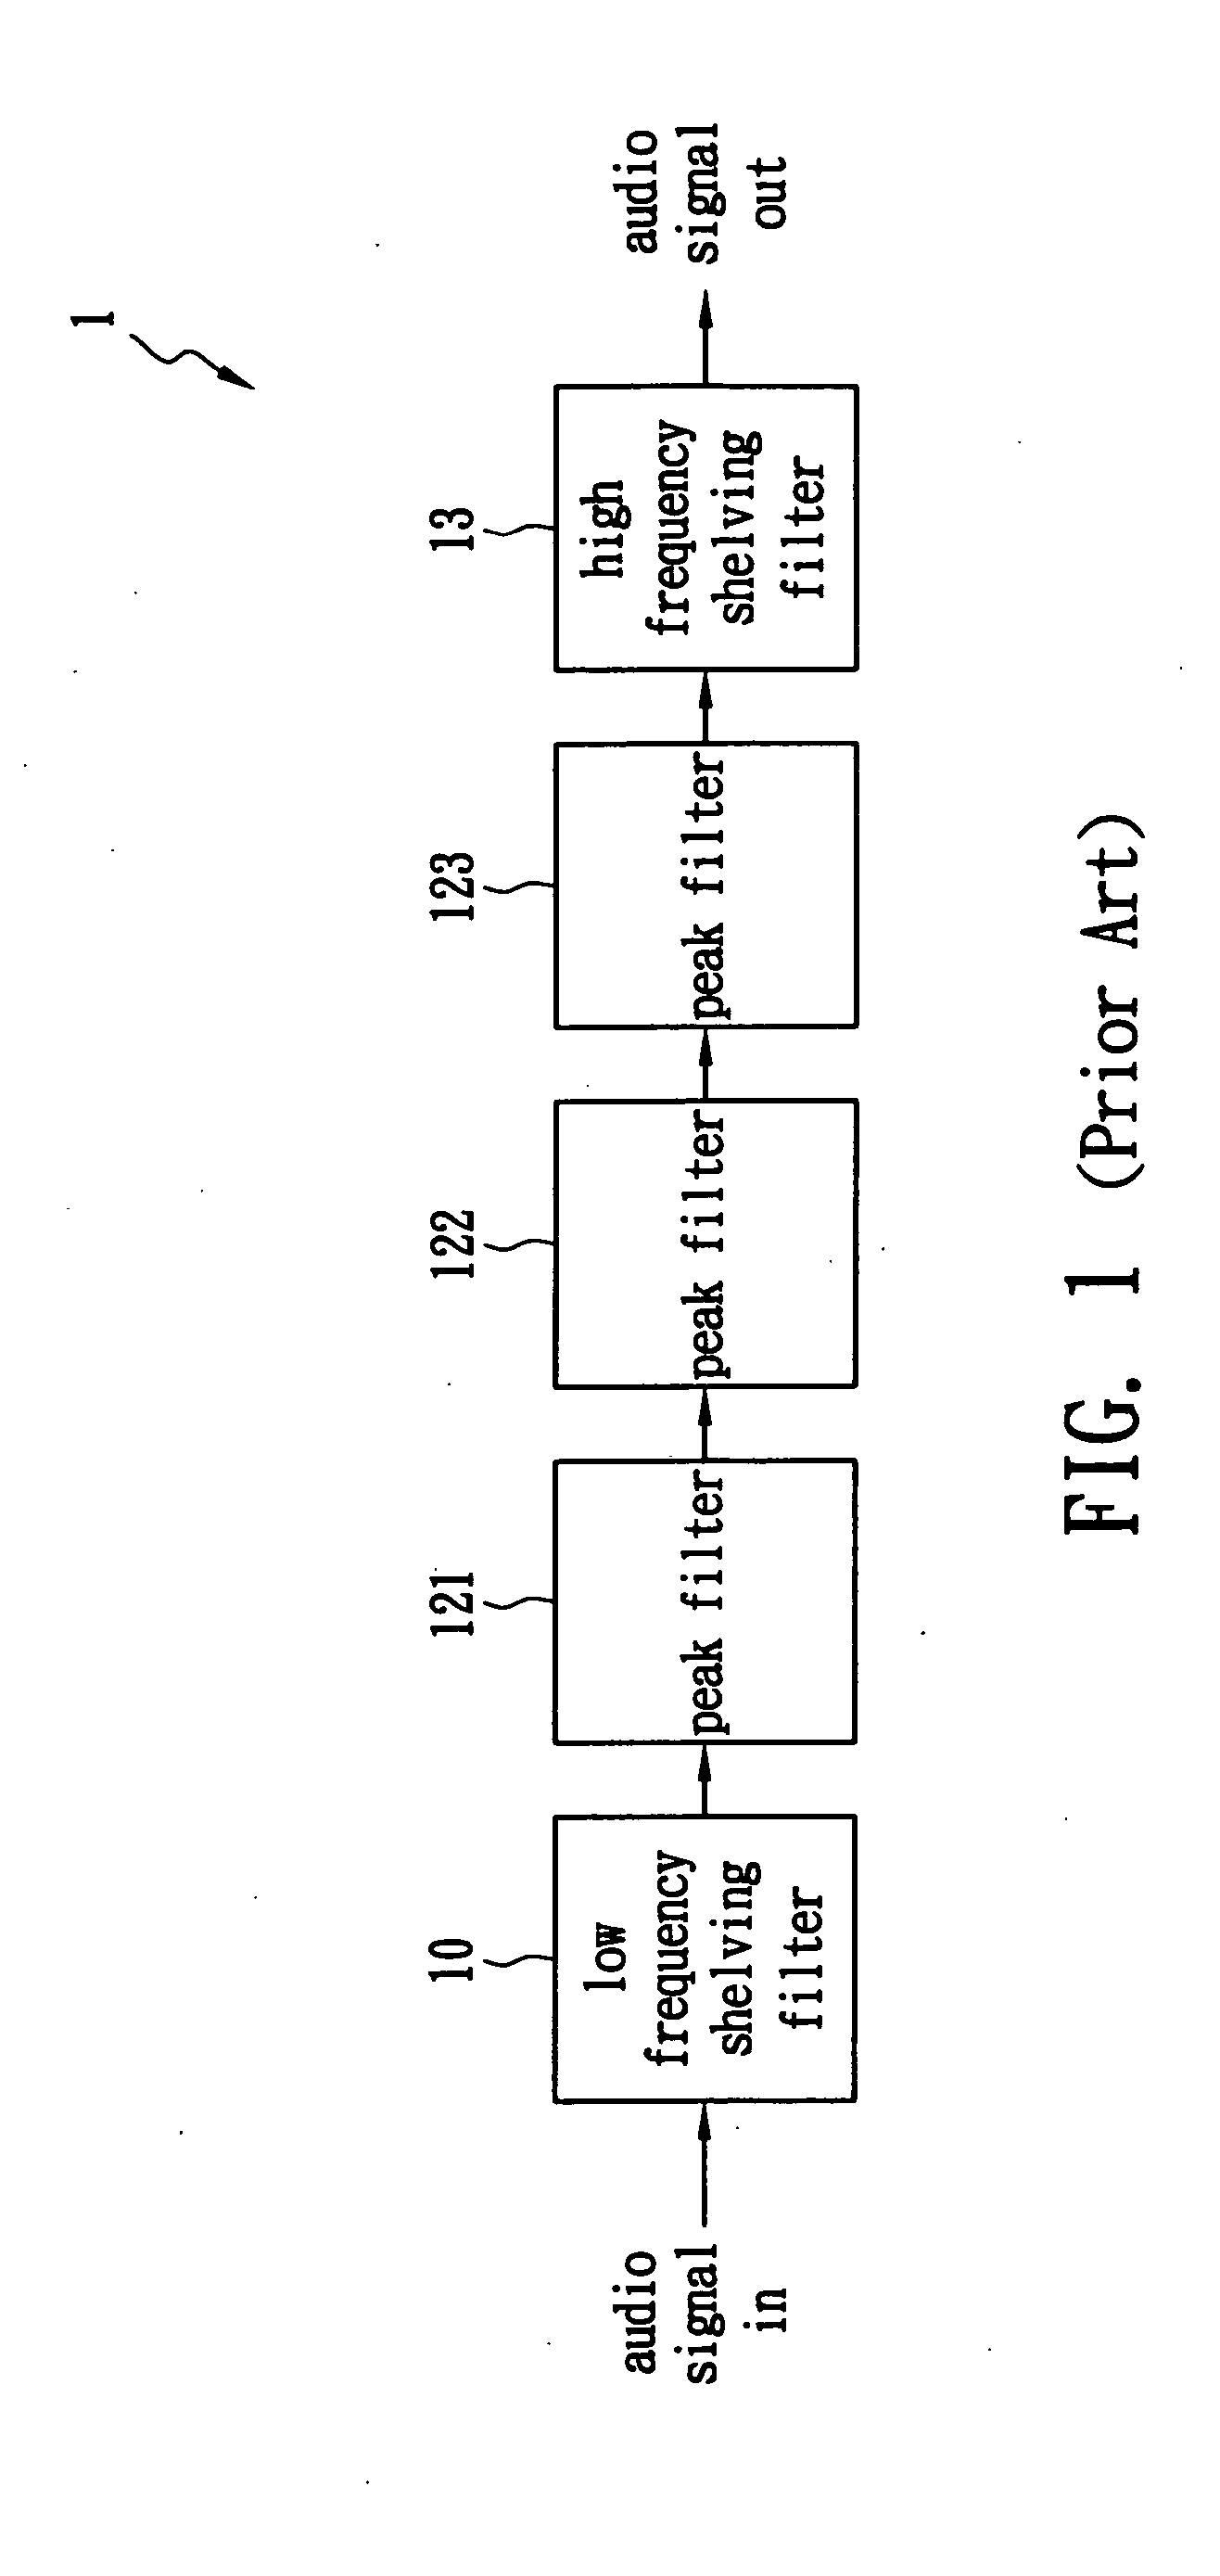 Equalizer bank with interference reduction